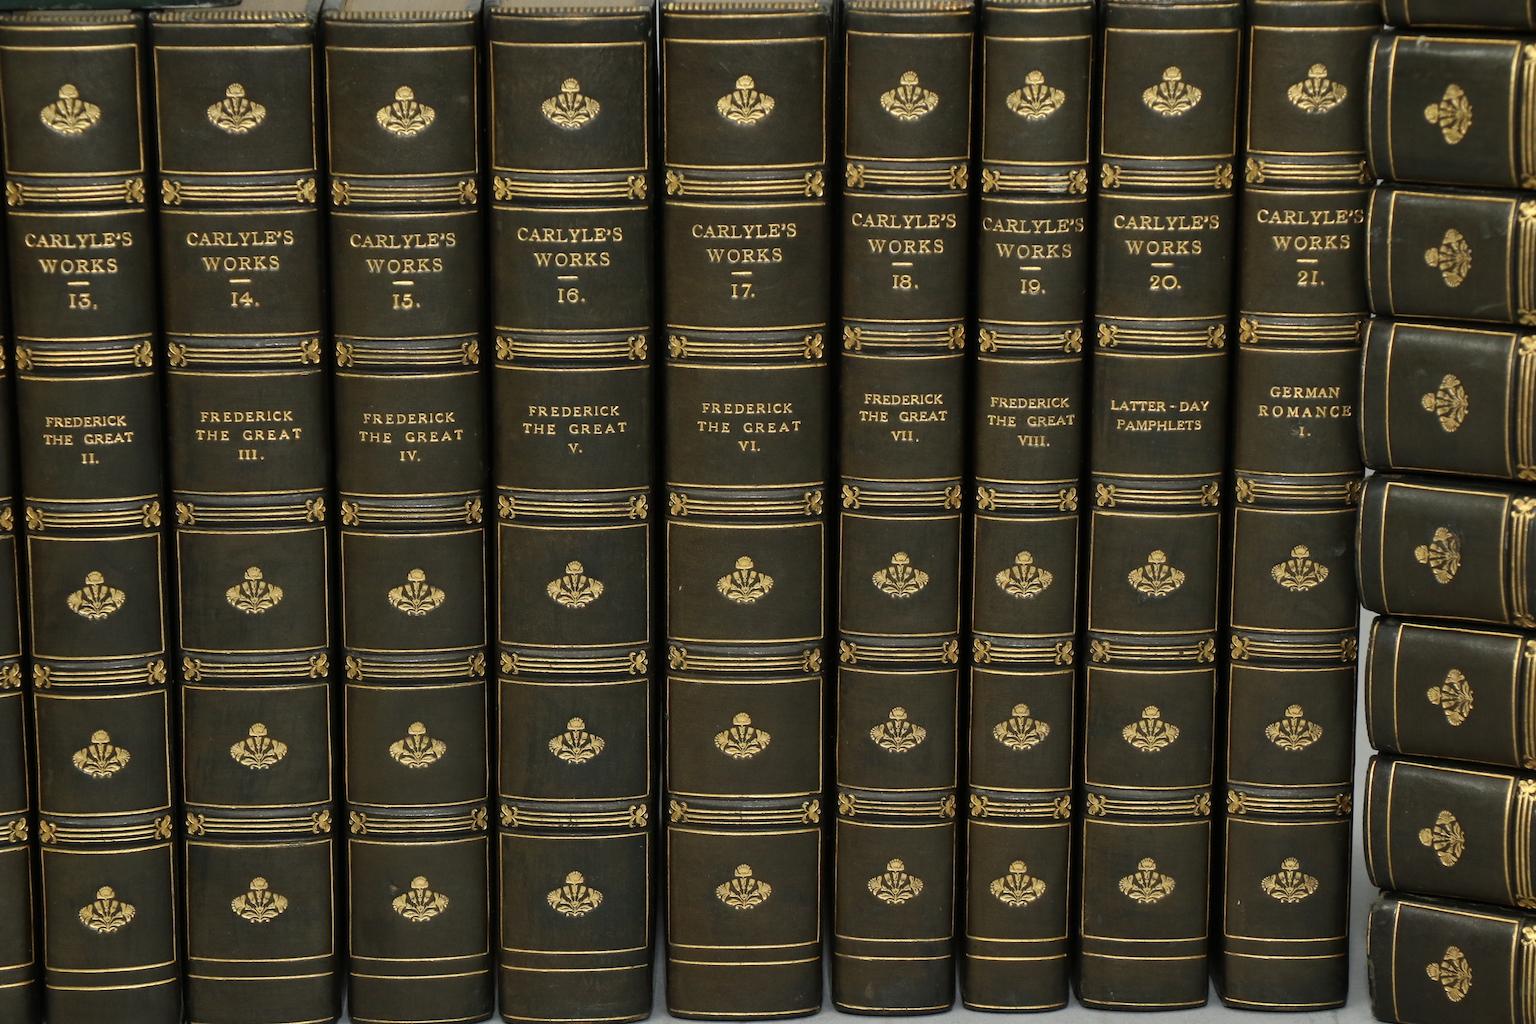 Leatherbound. Thirty volumes. Octavo. Bound in three quarter green calf by Morrell Binders, top edges gilt, raised bands, and gilt panel. Very good. Published in London by Chapman and Hall in 1831.

All listed dimensions are for a single